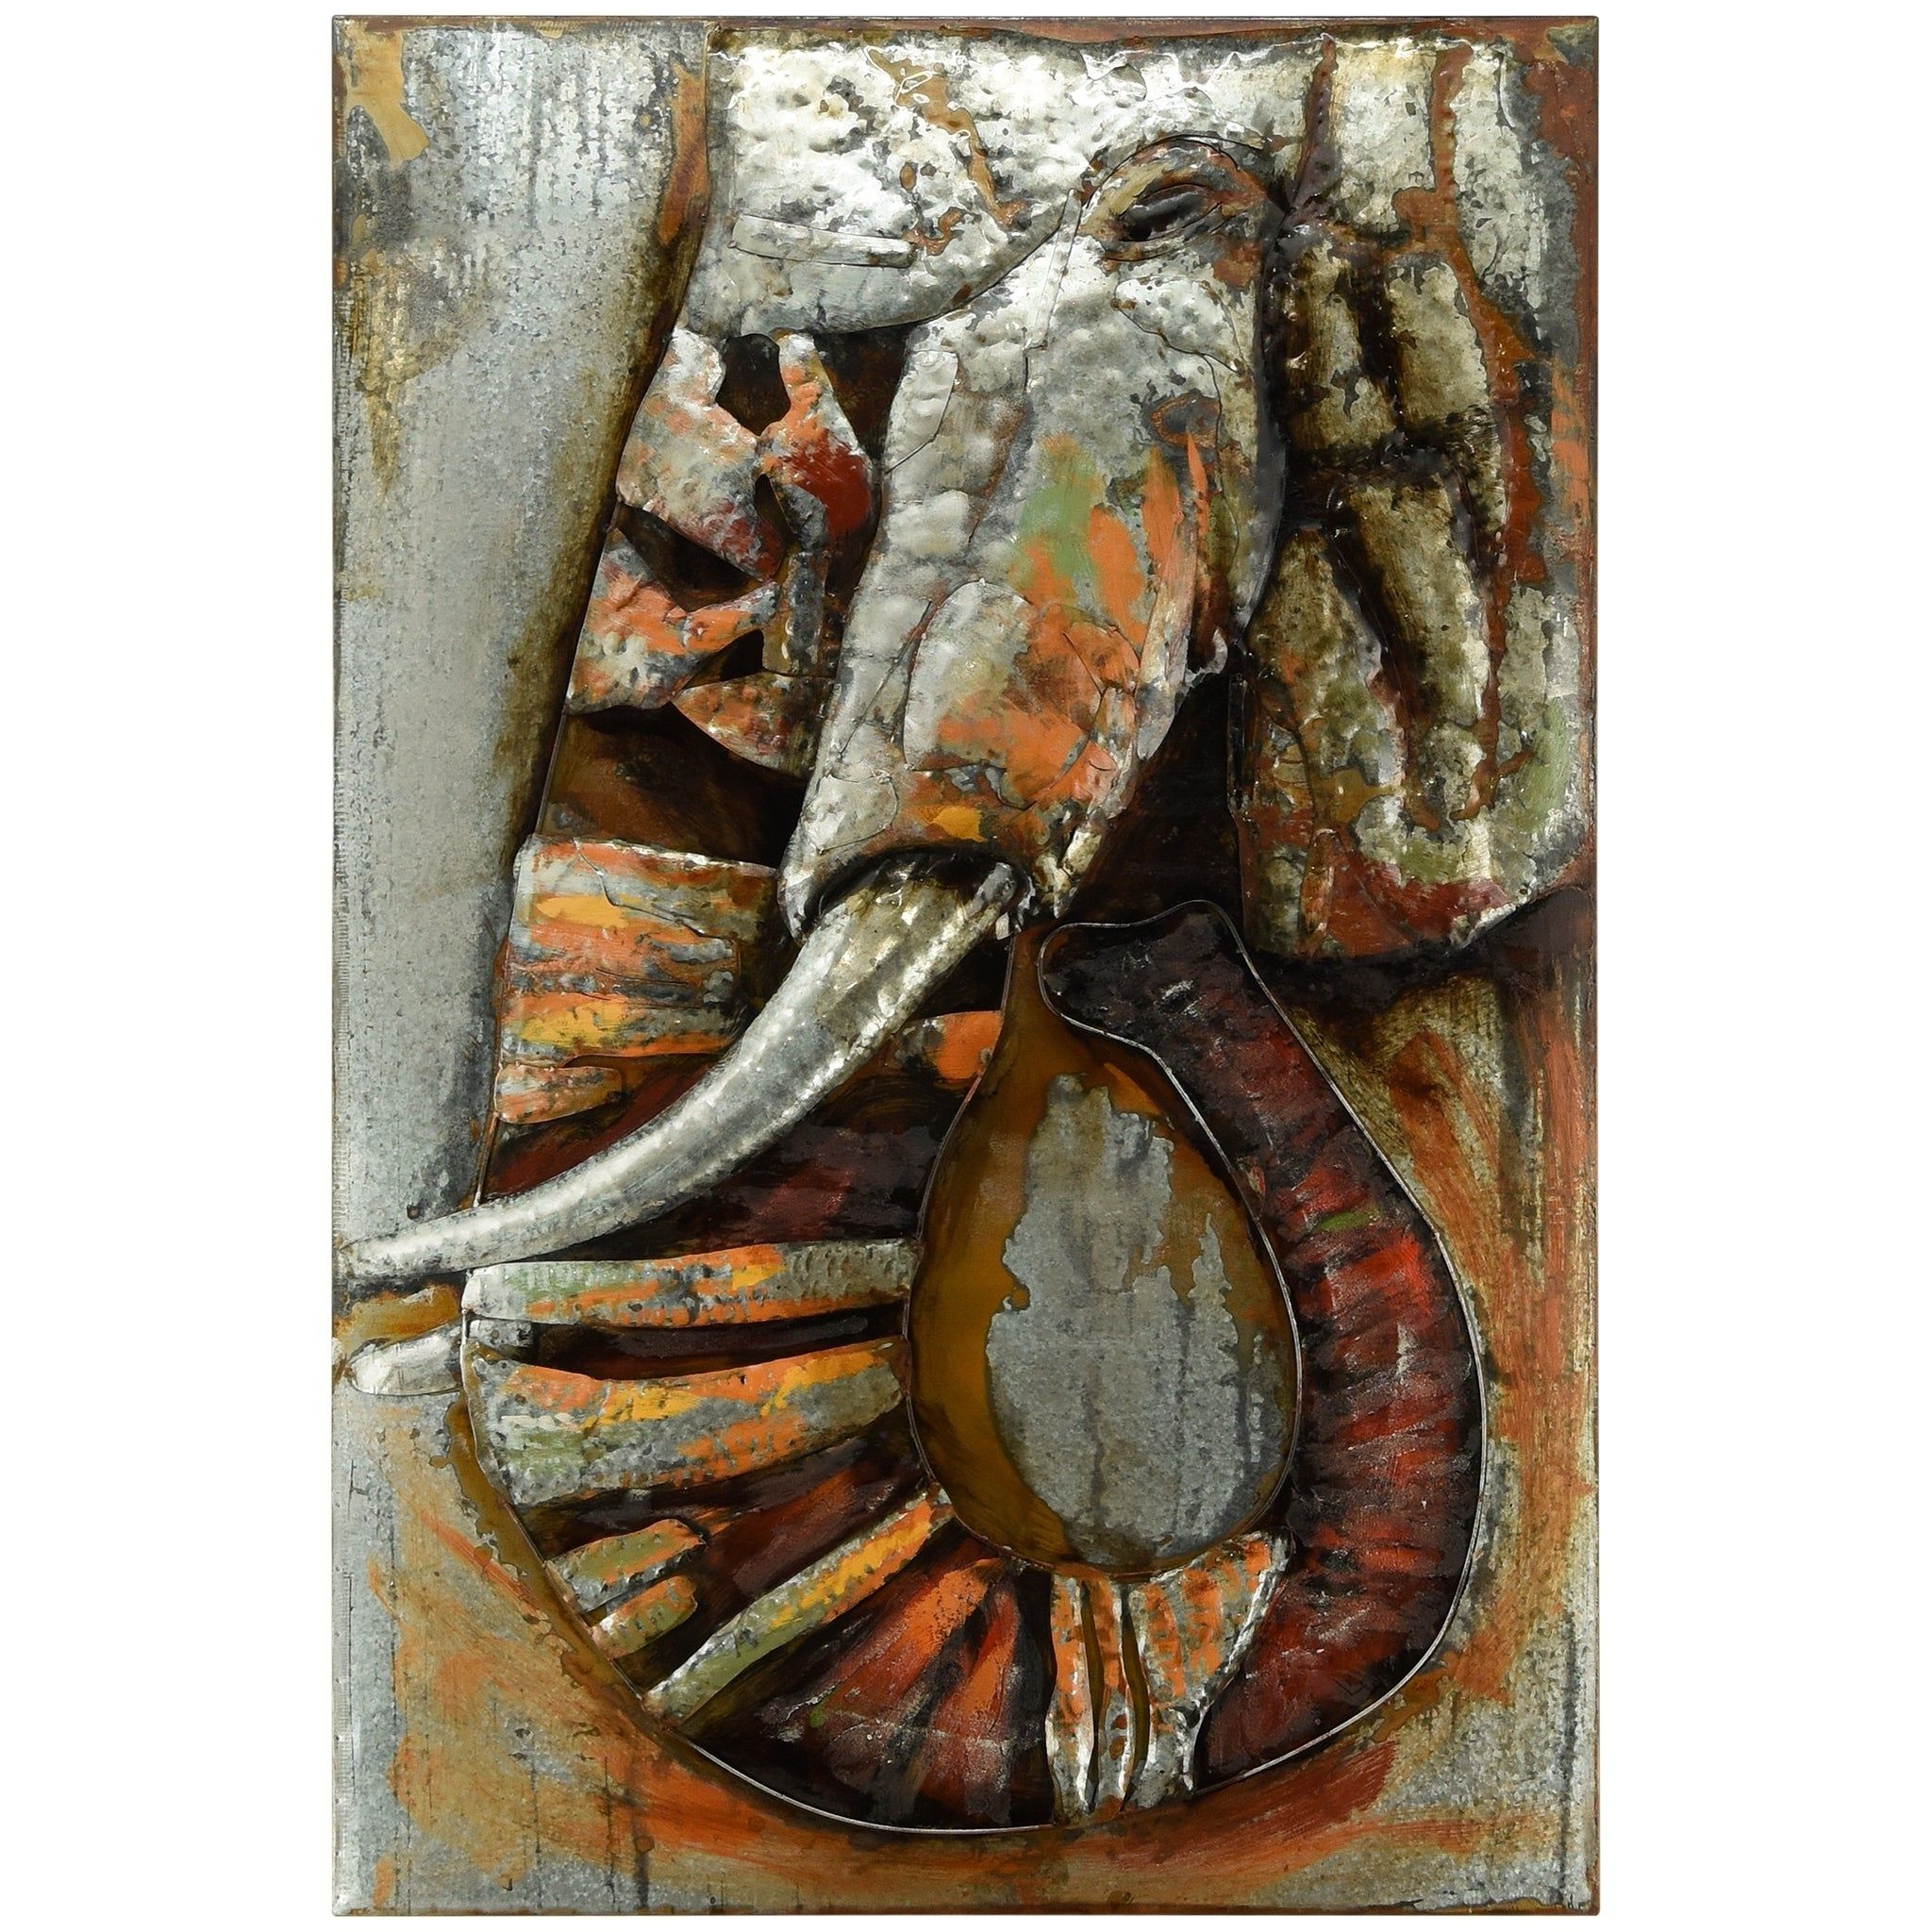 Mixed Media Iron Hand Painted Dimensional Wall Decor Regarding Widely Used Shop "elephant" Mixed Media Iron Hand Painted Dimensional Wall Décor (View 17 of 20)